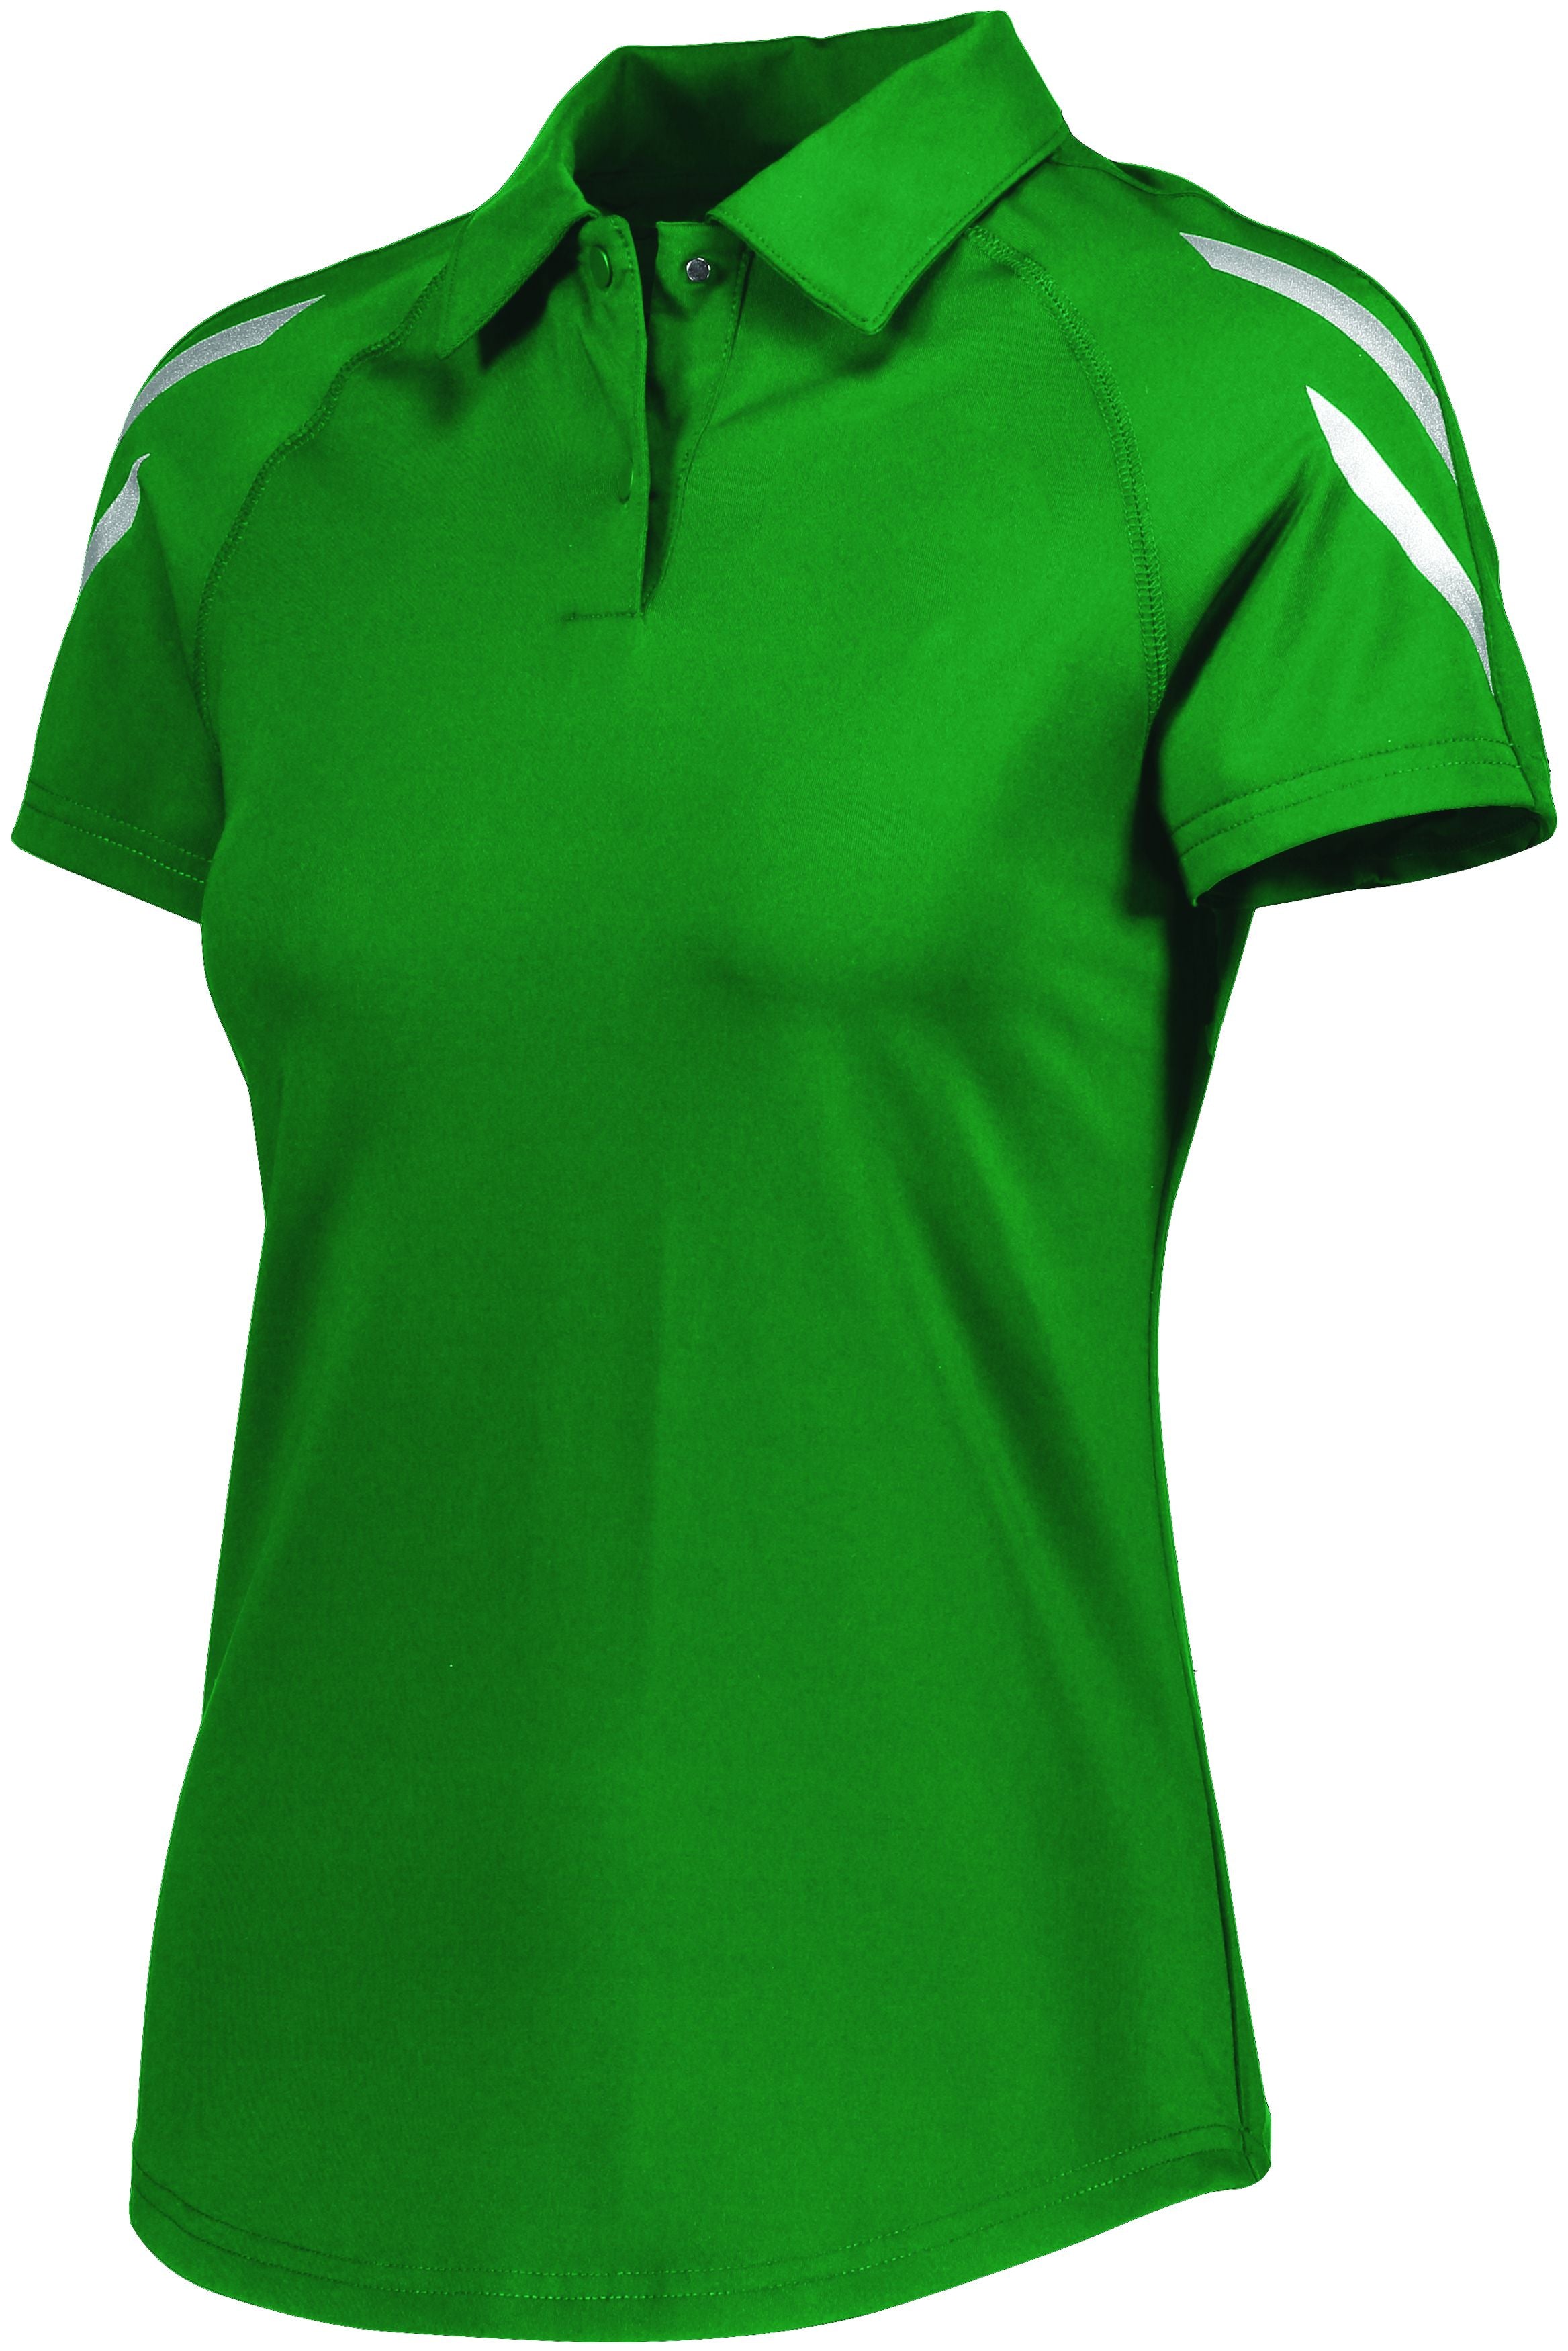 Holloway Ladies Flux Polo in Kelly  -Part of the Ladies, Ladies-Polo, Polos, Holloway, Shirts, Flux-Collection, Corporate-Collection product lines at KanaleyCreations.com